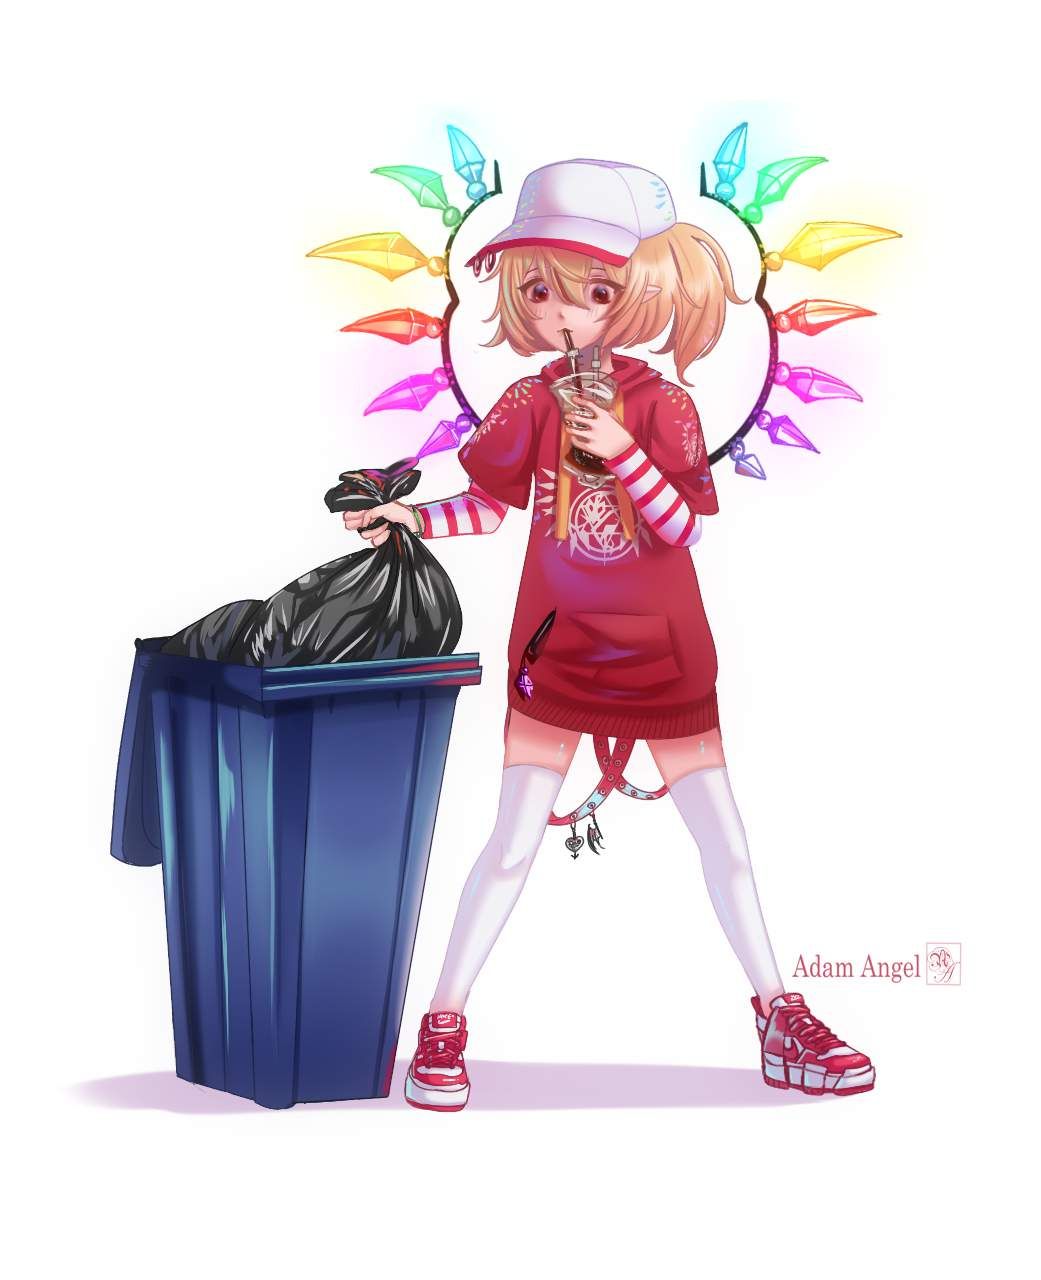 【Morning Eros】Secondary erotic image of a girl throwing away the garbage 26